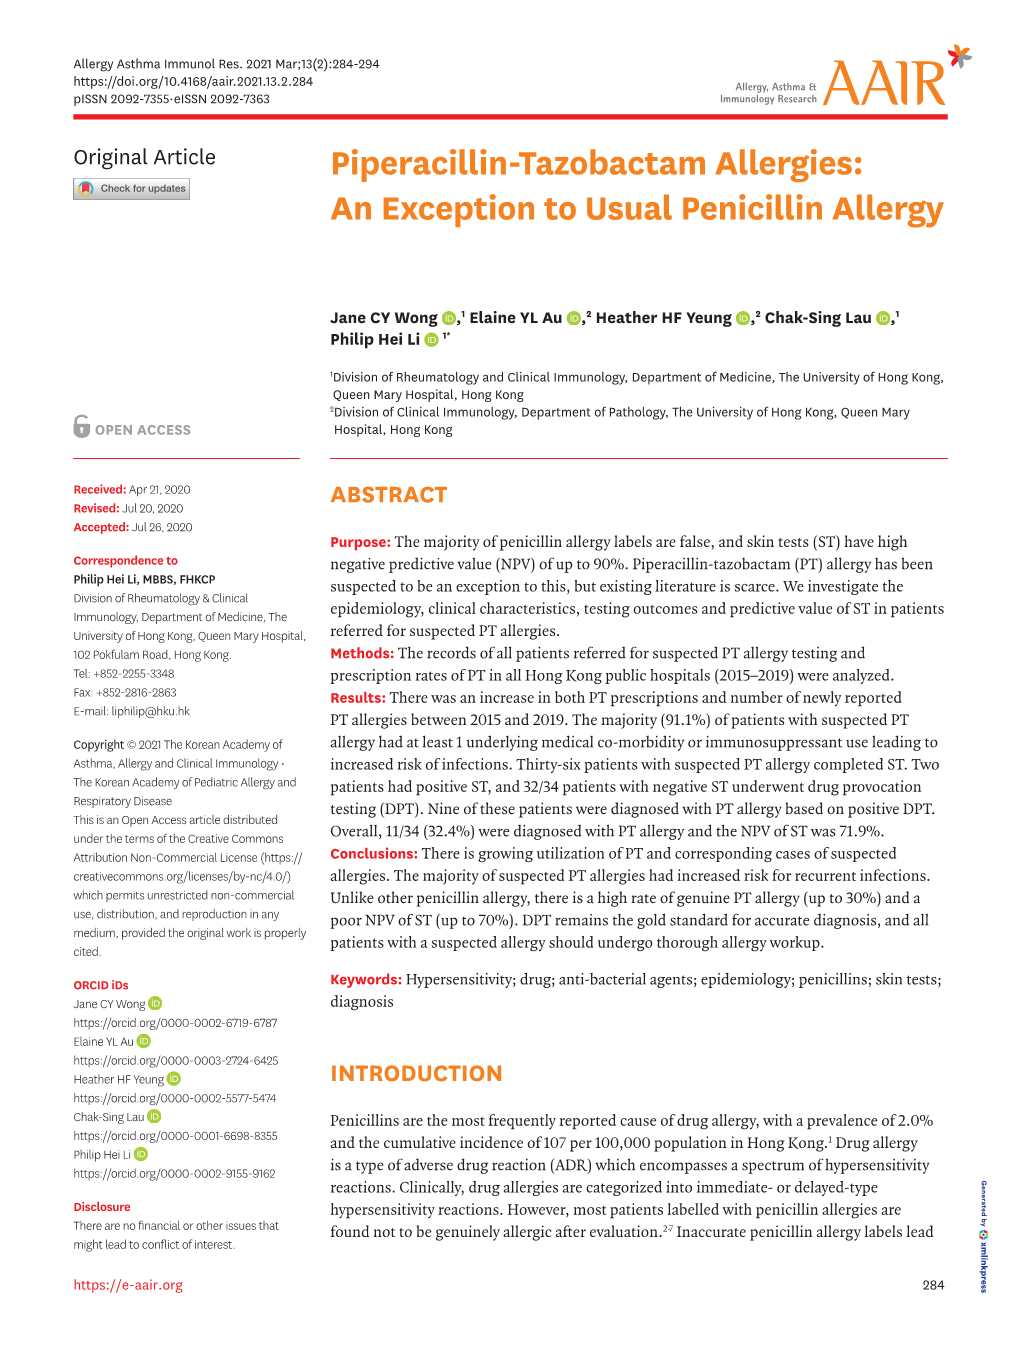 Piperacillin-Tazobactam Allergies: an Exception to Usual Penicillin Allergy